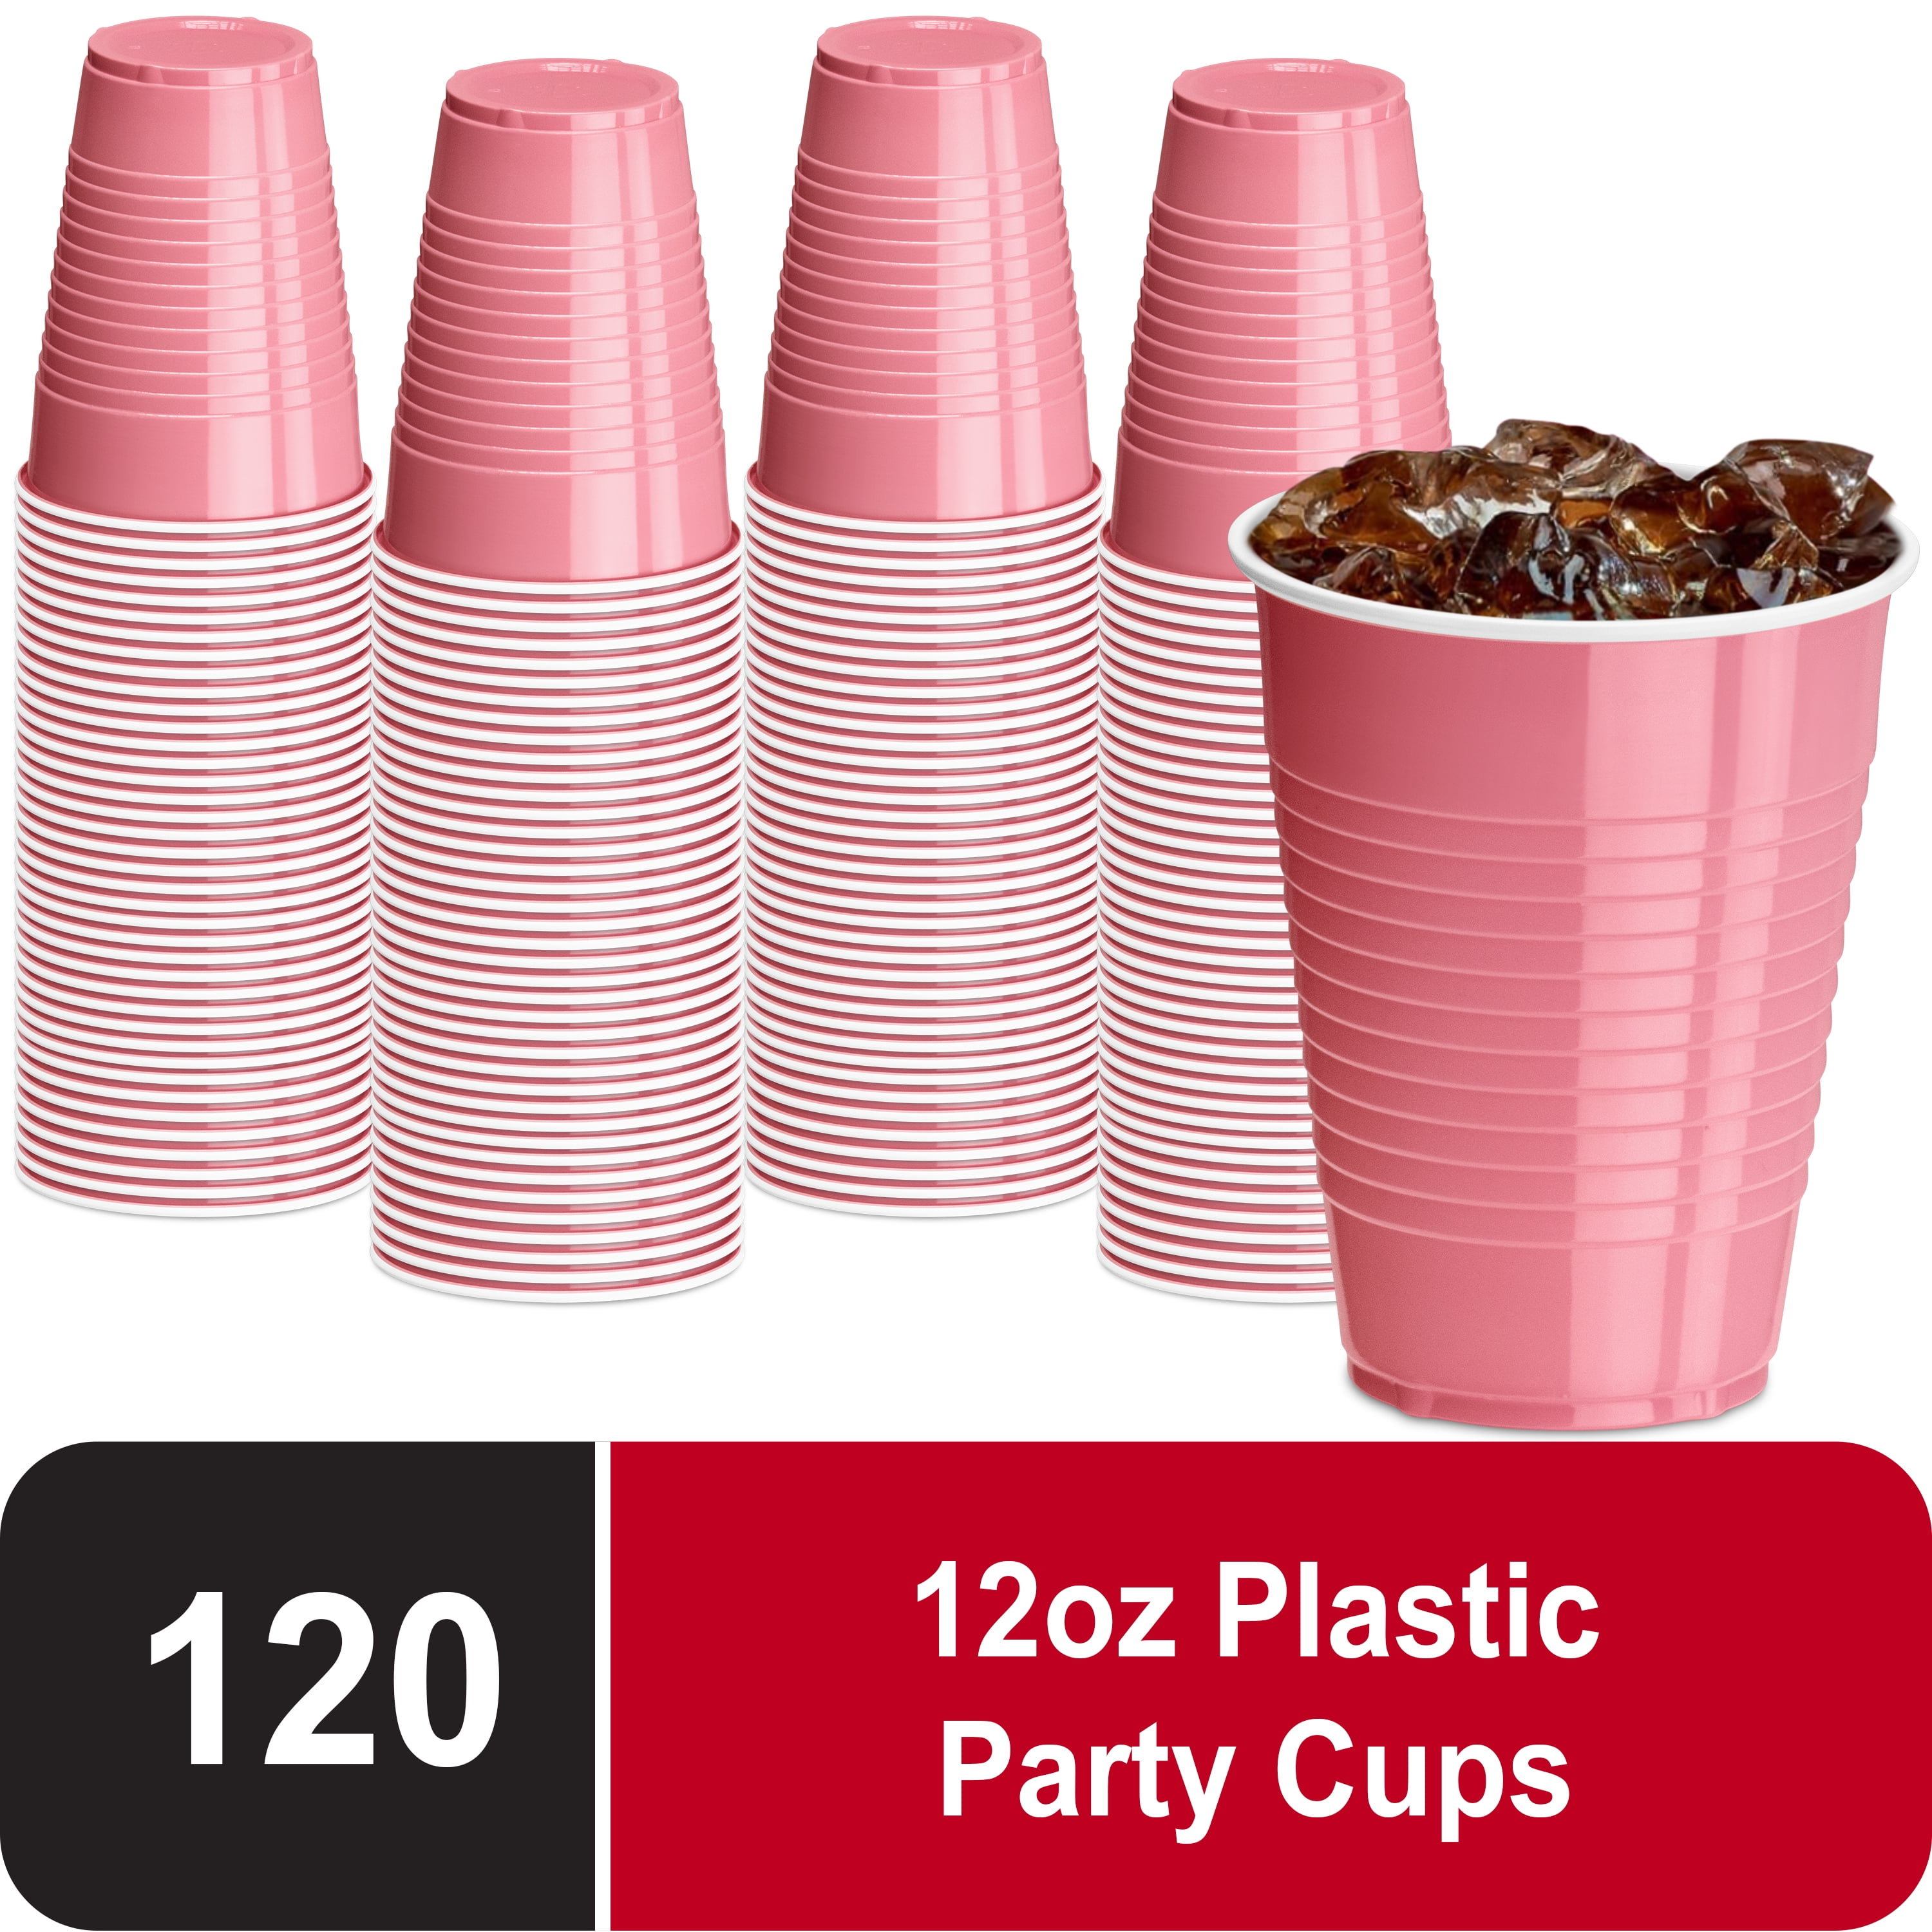 Decorrack Party Cups 12 oz Reusable Disposable Cups for Birthday Party Bachelorette Camping Indoor Outdoor Events Beverage Drinking Cups (Pink, 120)